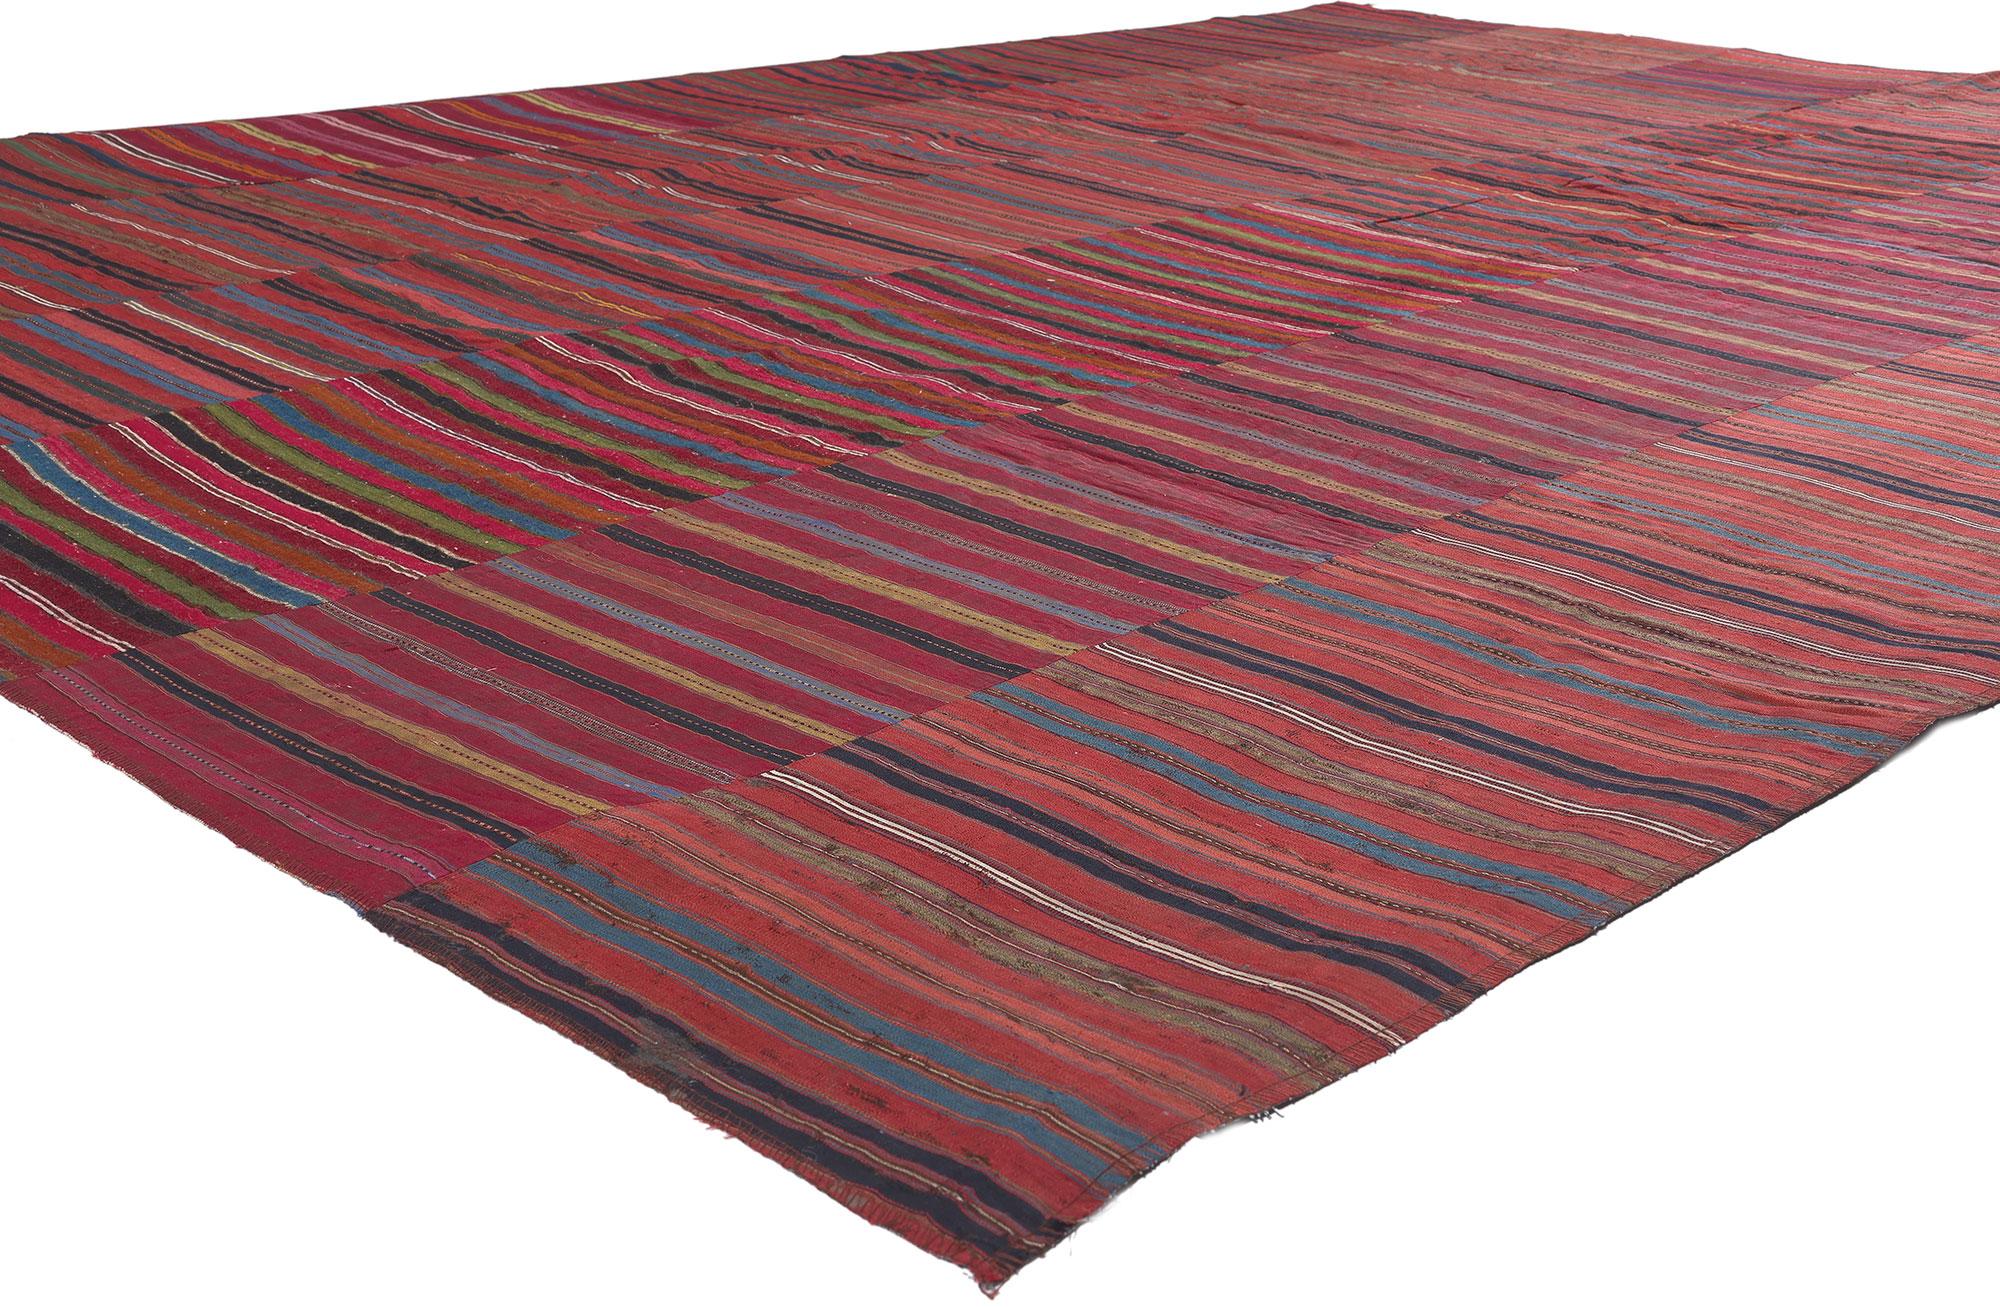 ​60643 Vintage Turkish Striped Kilim Rug, 08'06 x 11'07.
Rustic sensibility meets rugged charm in this handwoven wool vintage Turkish kilim rug. The striped design and kaleidoscope of colors woven into this piece work together creating a modern yet